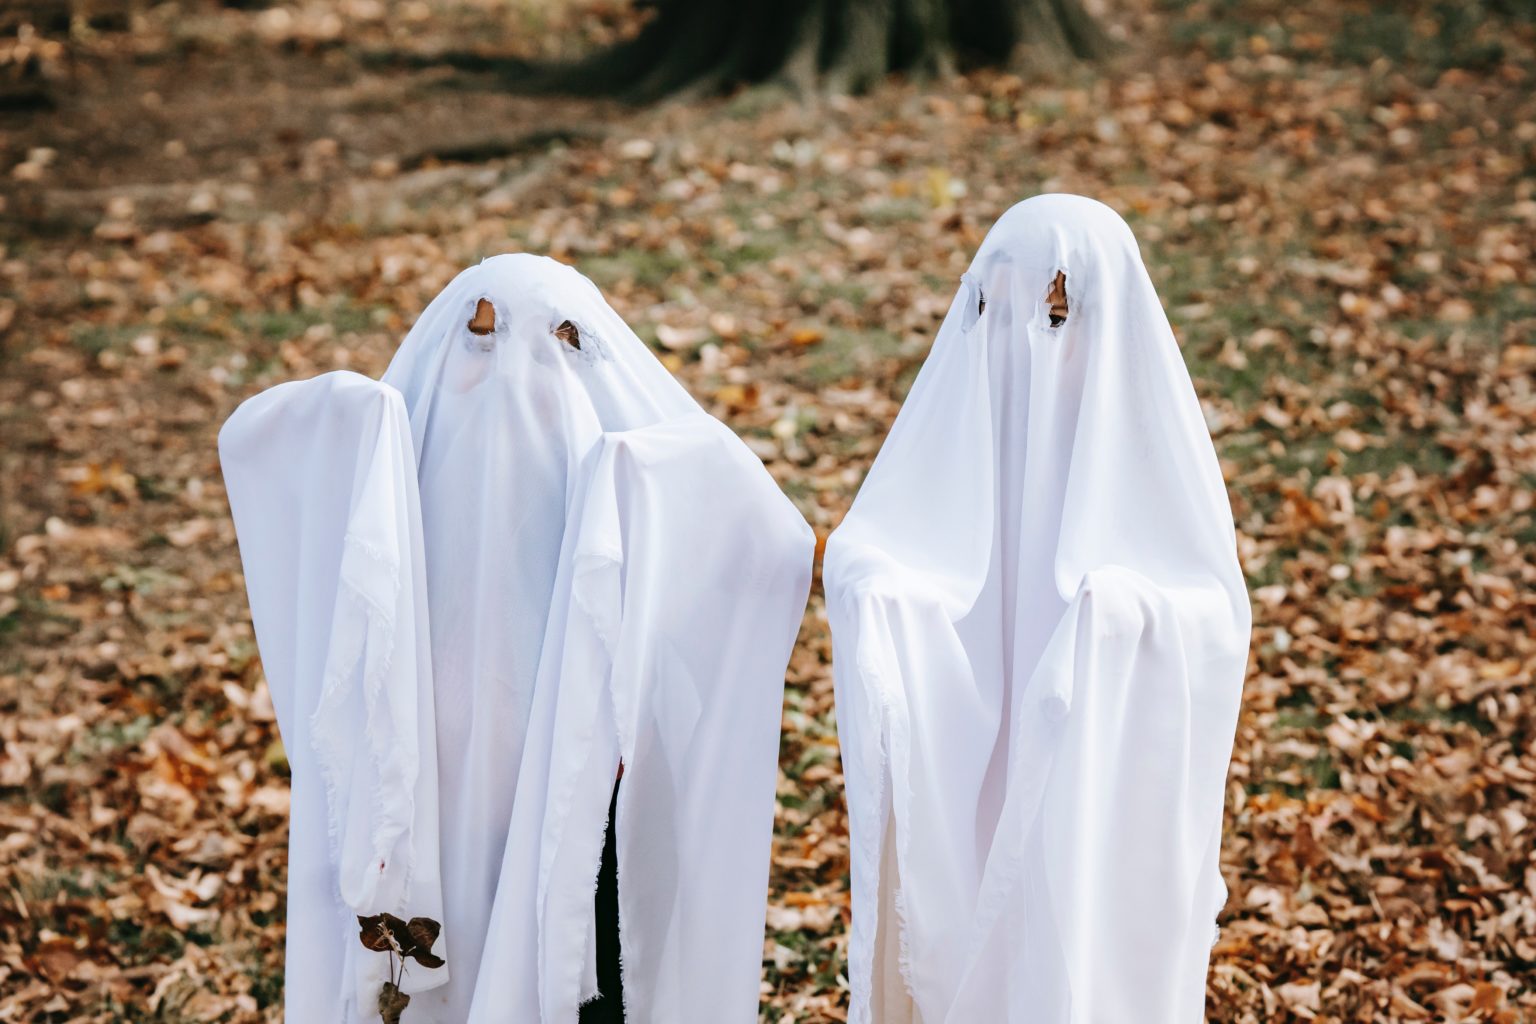 kids in ghost costumes for fall fun in raleigh